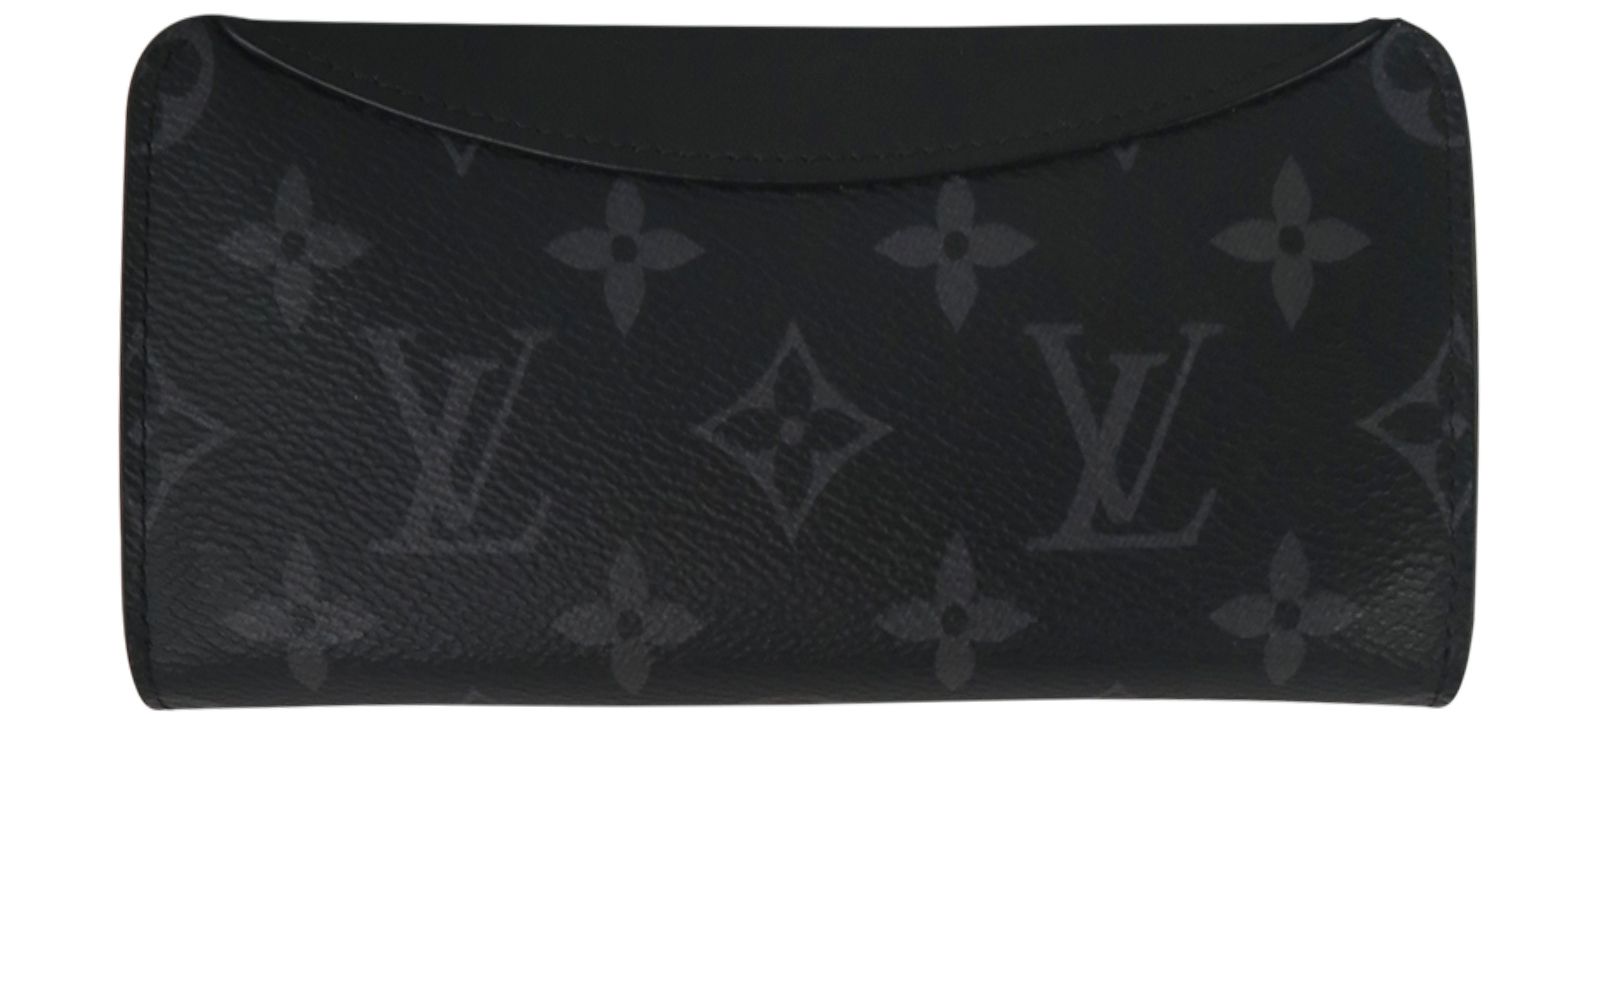 New vs Old Sunglasses case from Louis Vuitton # woody/ Lvlovermj 